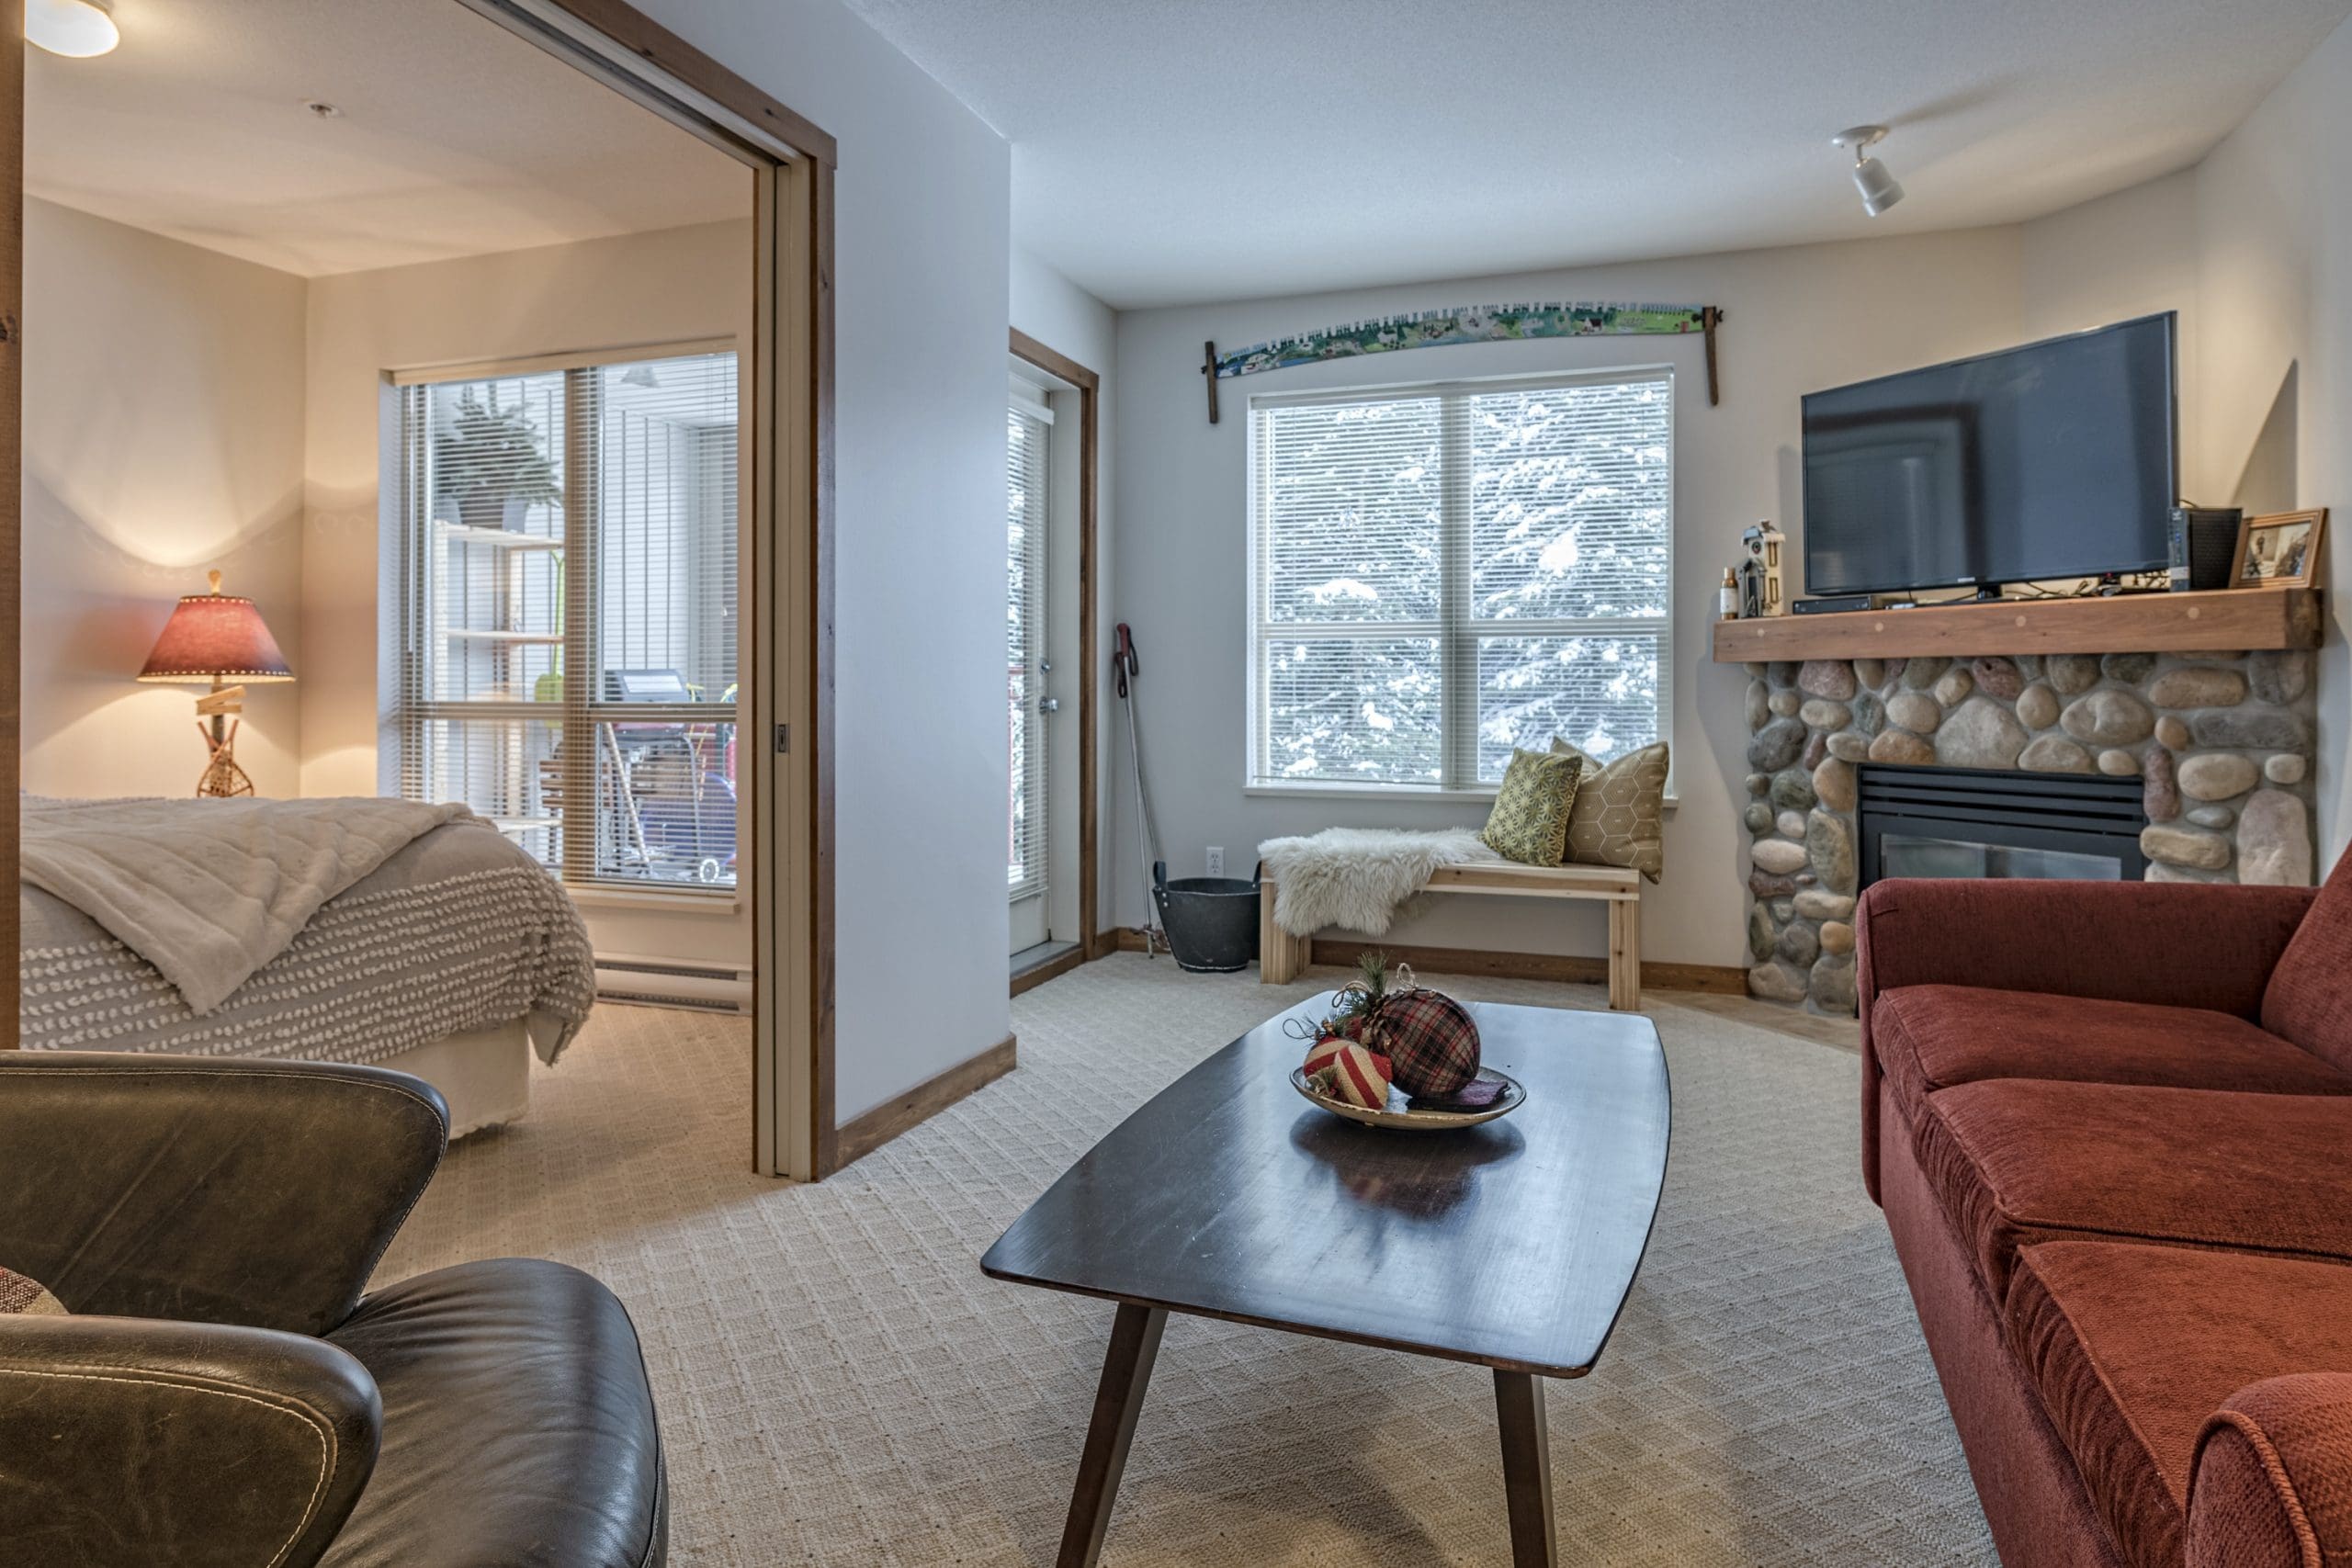 Living room of second floor condo. Ground level access from parking lot, but with a balcony with views of Silver Queen Chair. Cozy condo with gas fireplace, TV< and private alcove bunk room. Free parking and direct ski out access from building to chairlift.